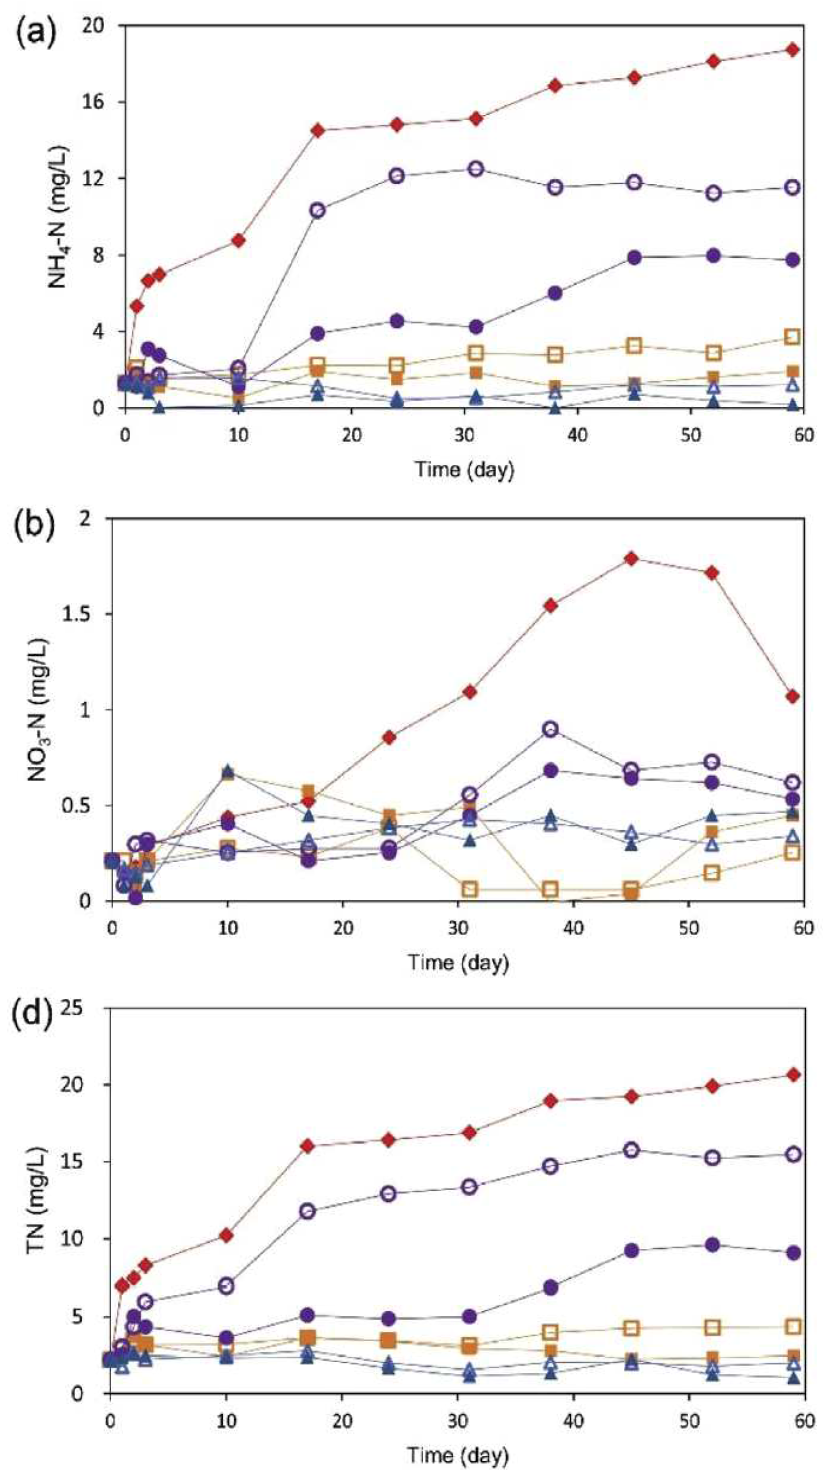 Effect of the thickness of the capping layer and material on the release of (a) NH4-N, (b) NO3-N, (c) T-N from uncapped and capped sediments during 60 d of laboratory incubation